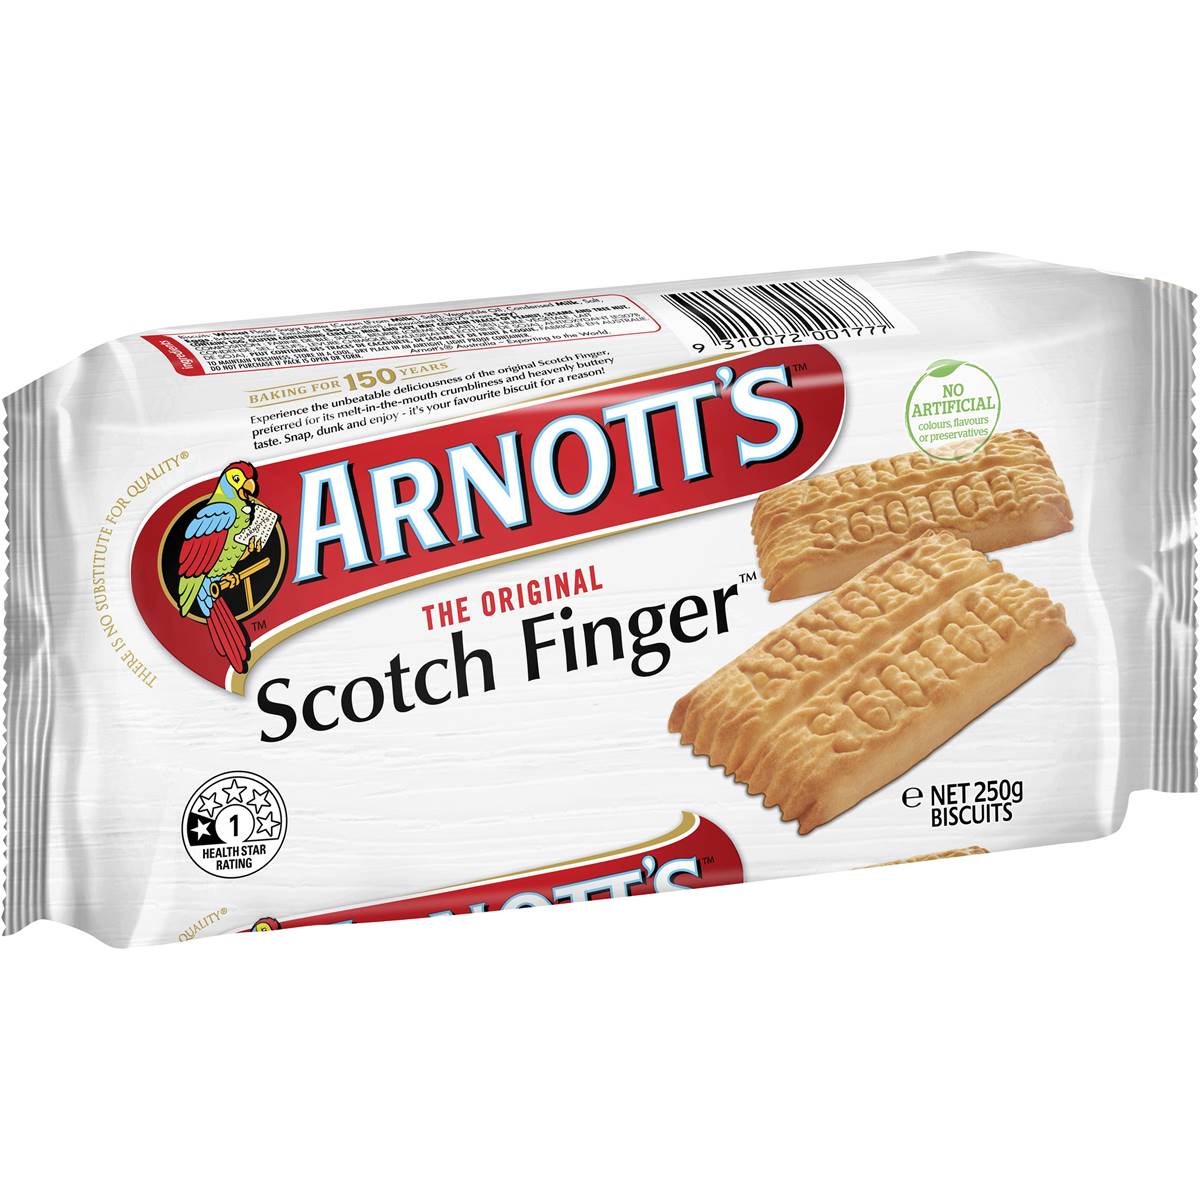 Arnotts Scotch Finger Biscuits 250g